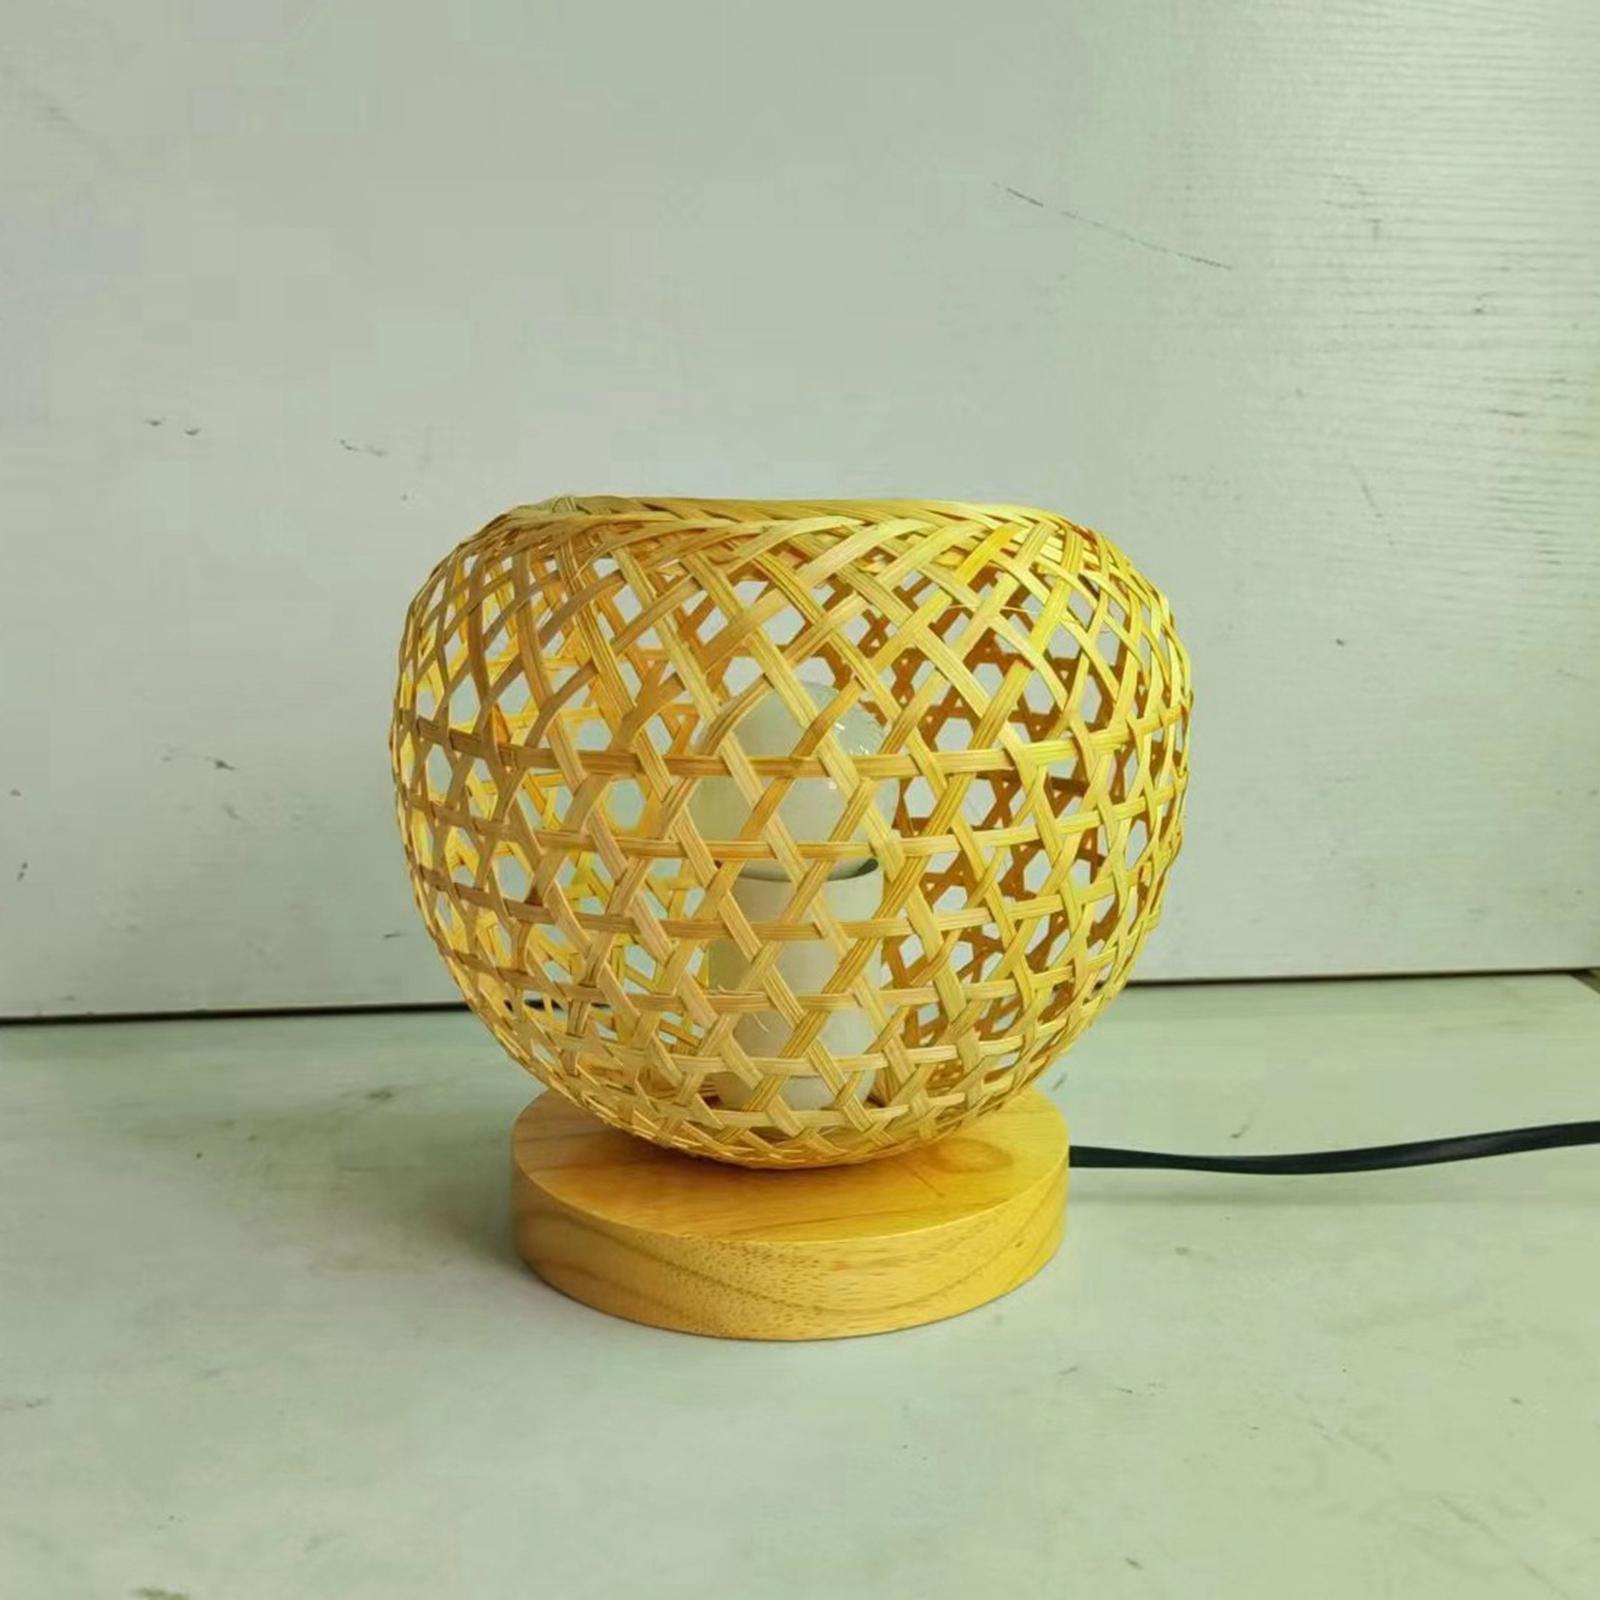 Bamboo Table Lamps Beside Lamp Reading Light Retro Decorative Desk Lamp Rattan Table Lamp for Living Room Tabletop Home Study Room Bedroom